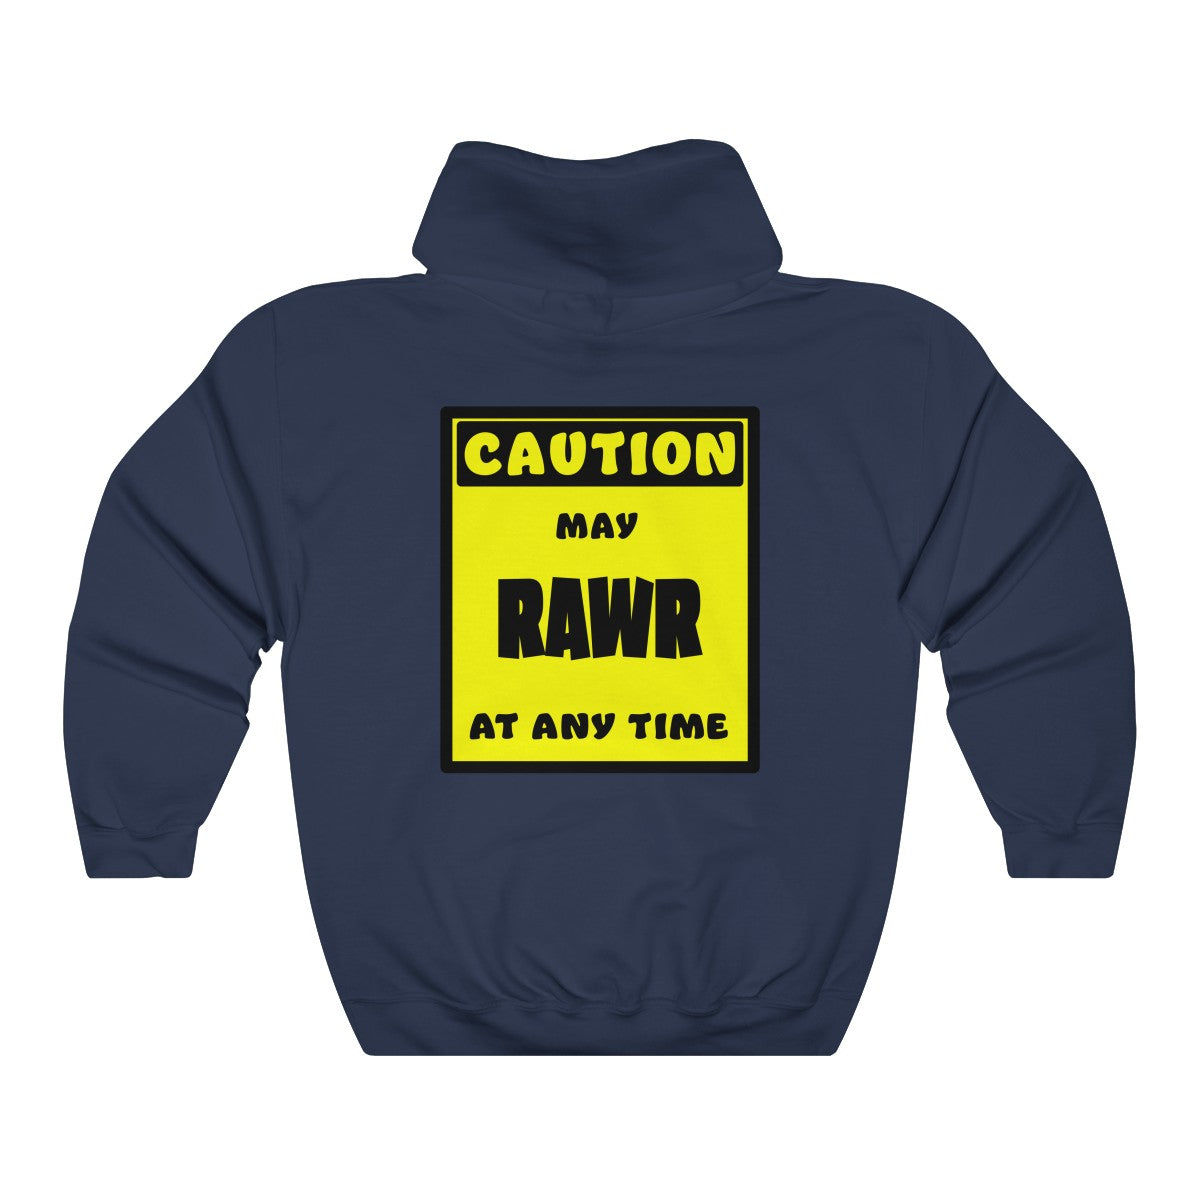 CAUTION! May RAWR at any time! - Hoodie Hoodie AFLT-Whootorca Navy Blue S 